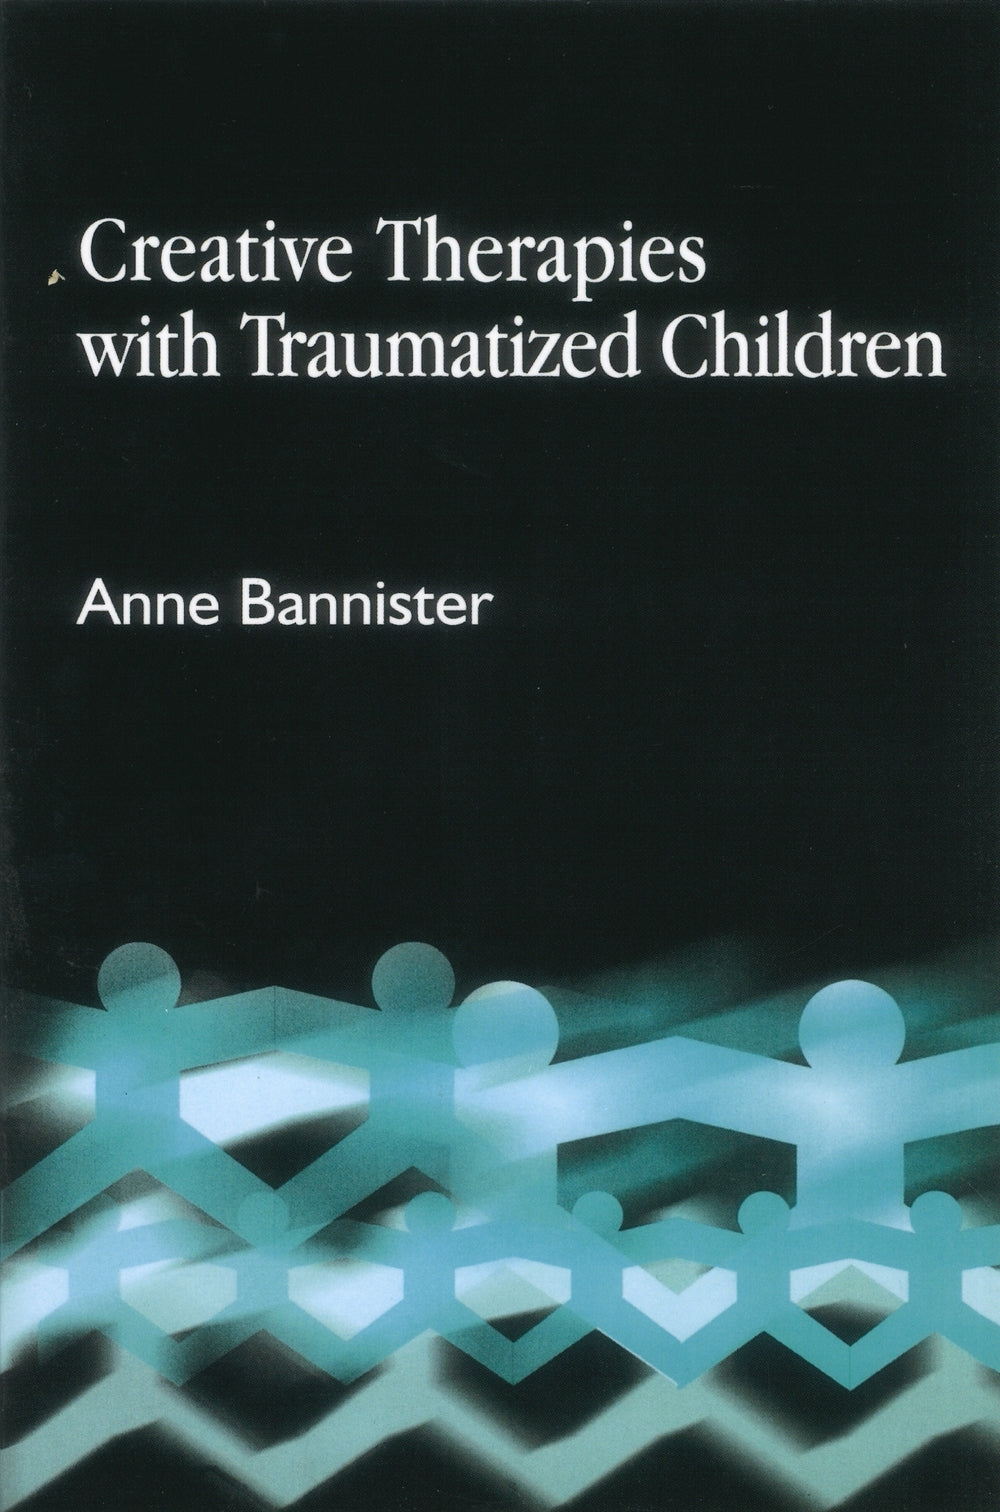 Creative Therapies with Traumatised Children by Anne Bannister